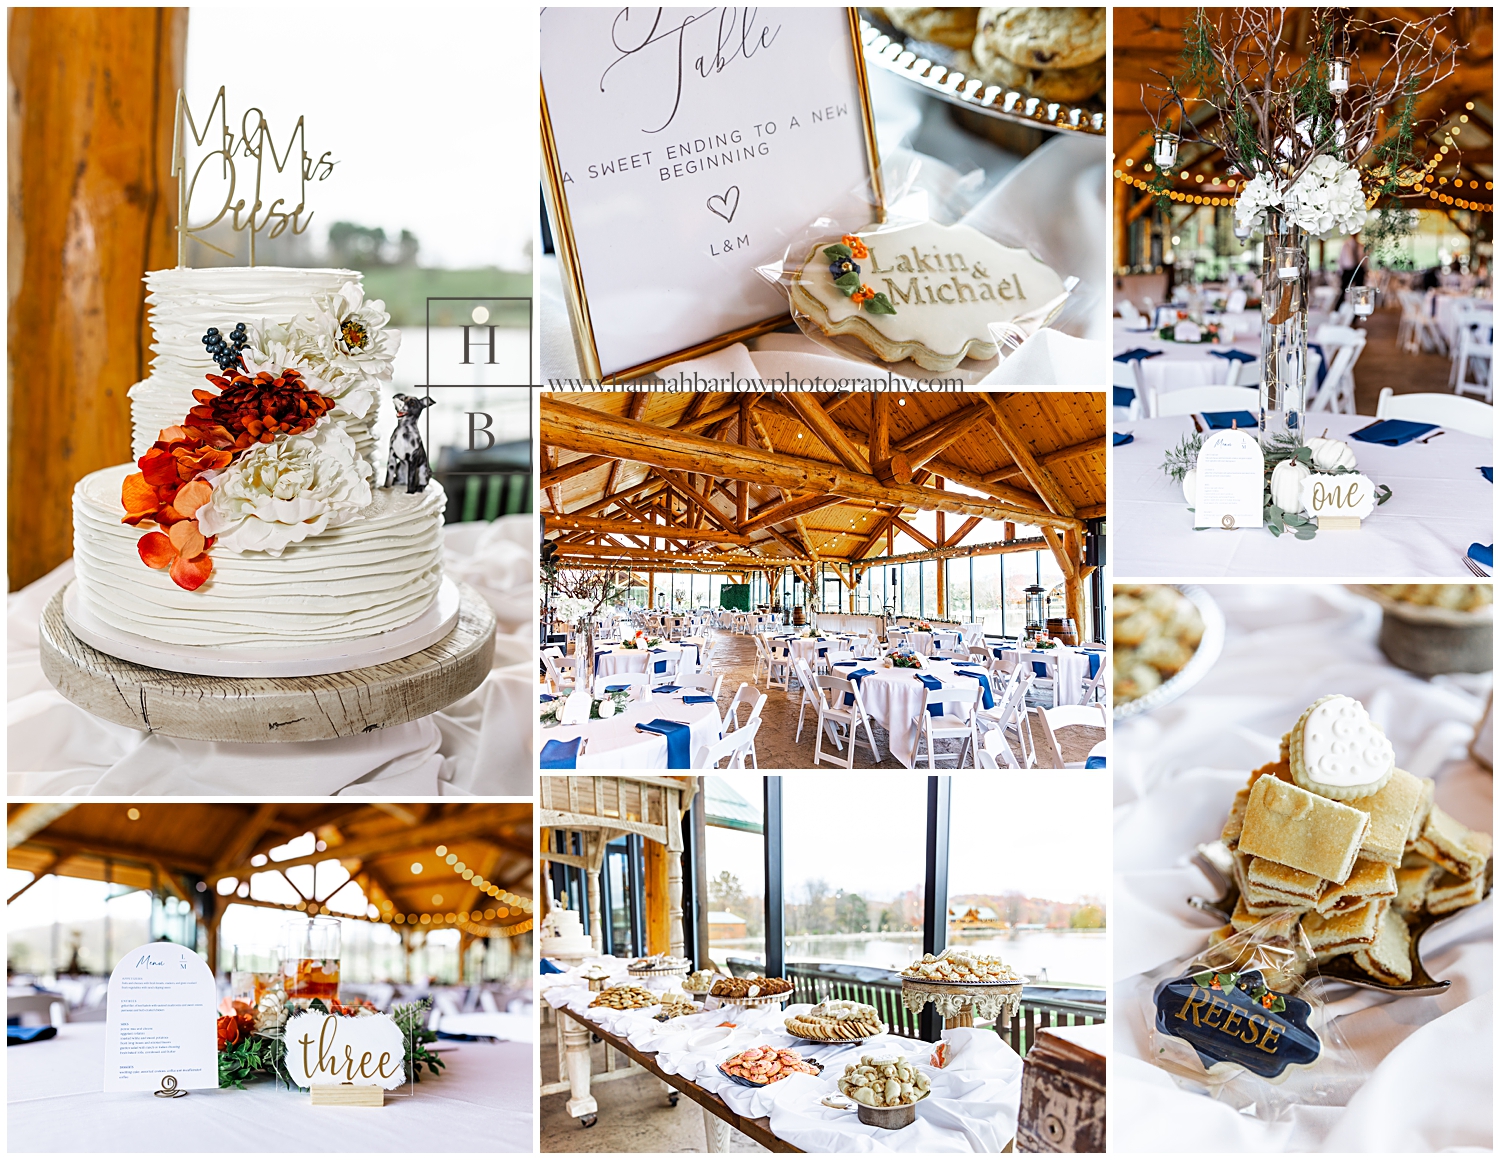 The Gathering Place wedding reception details